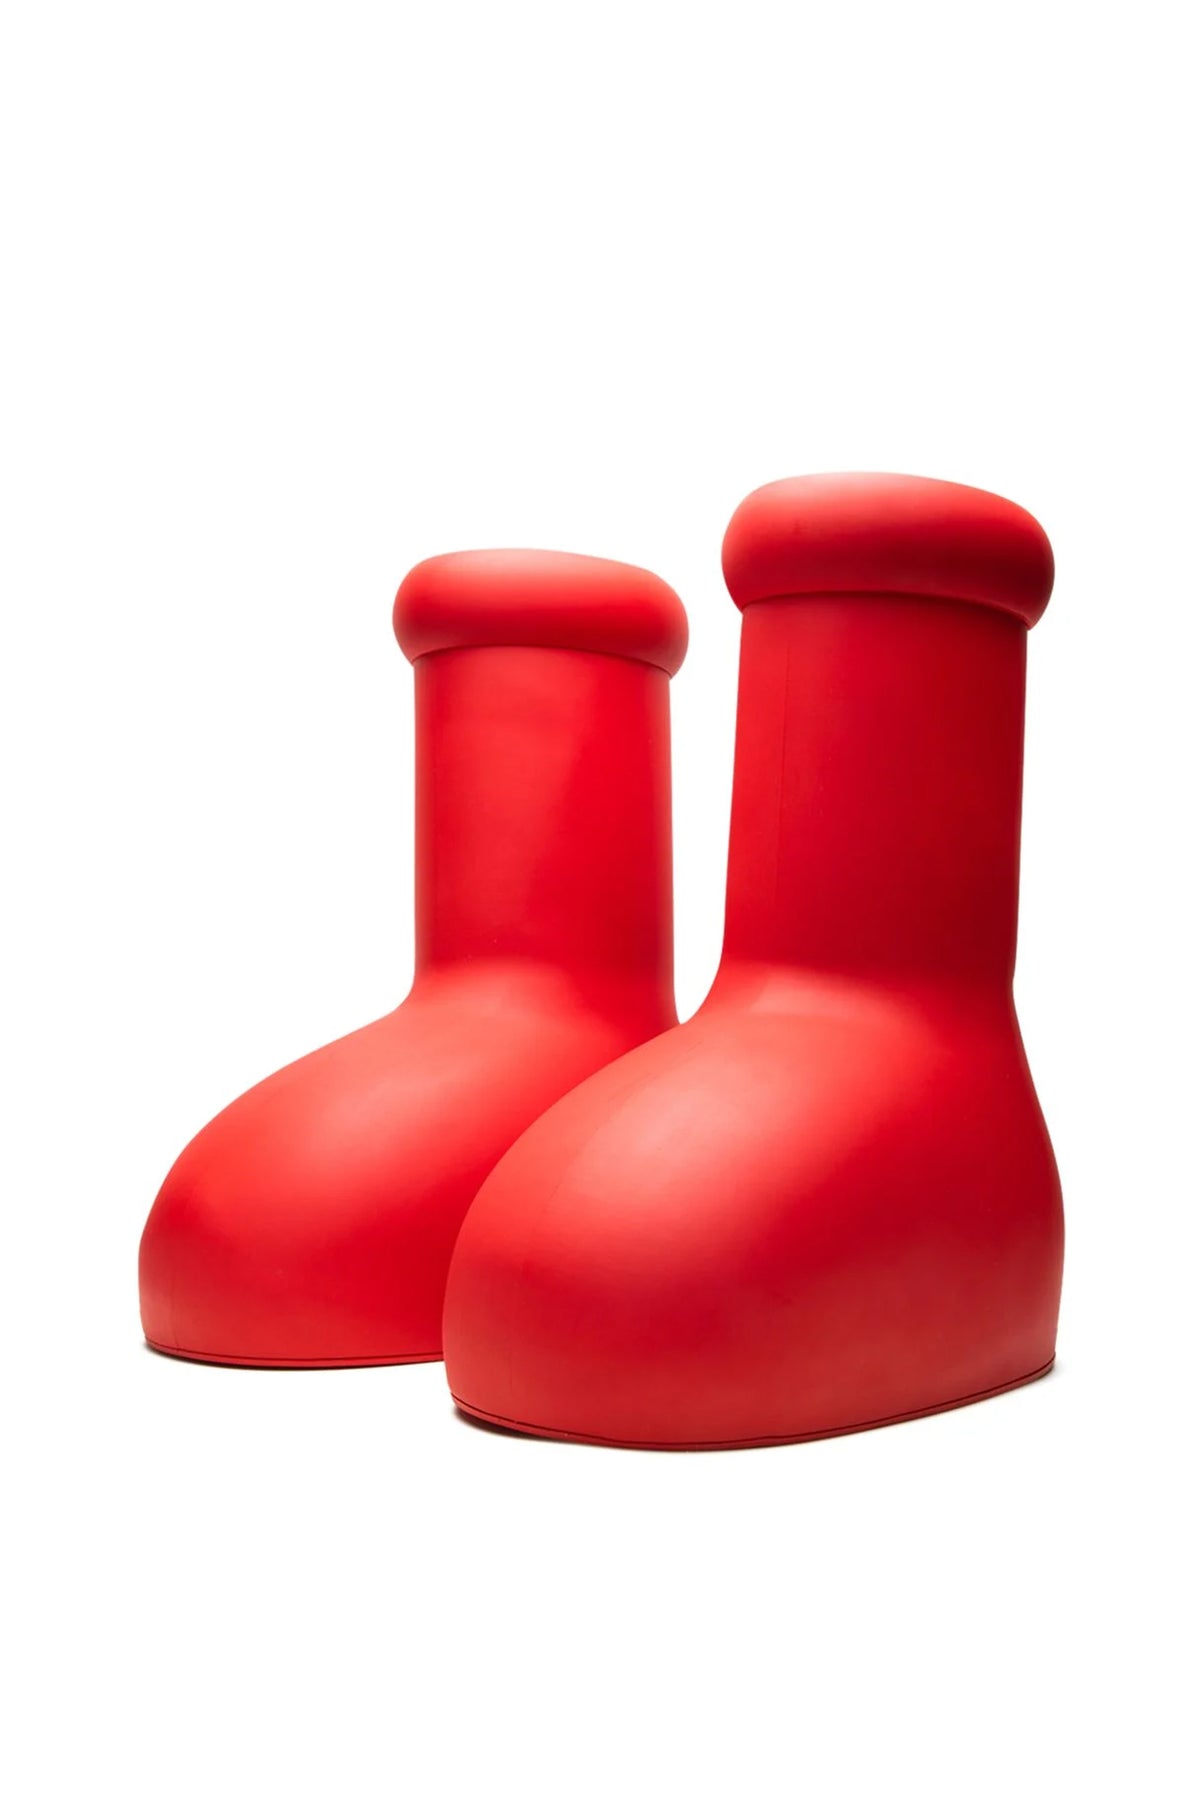 MSCHF SS23 BIG RED BOOTS RED NUBIAN